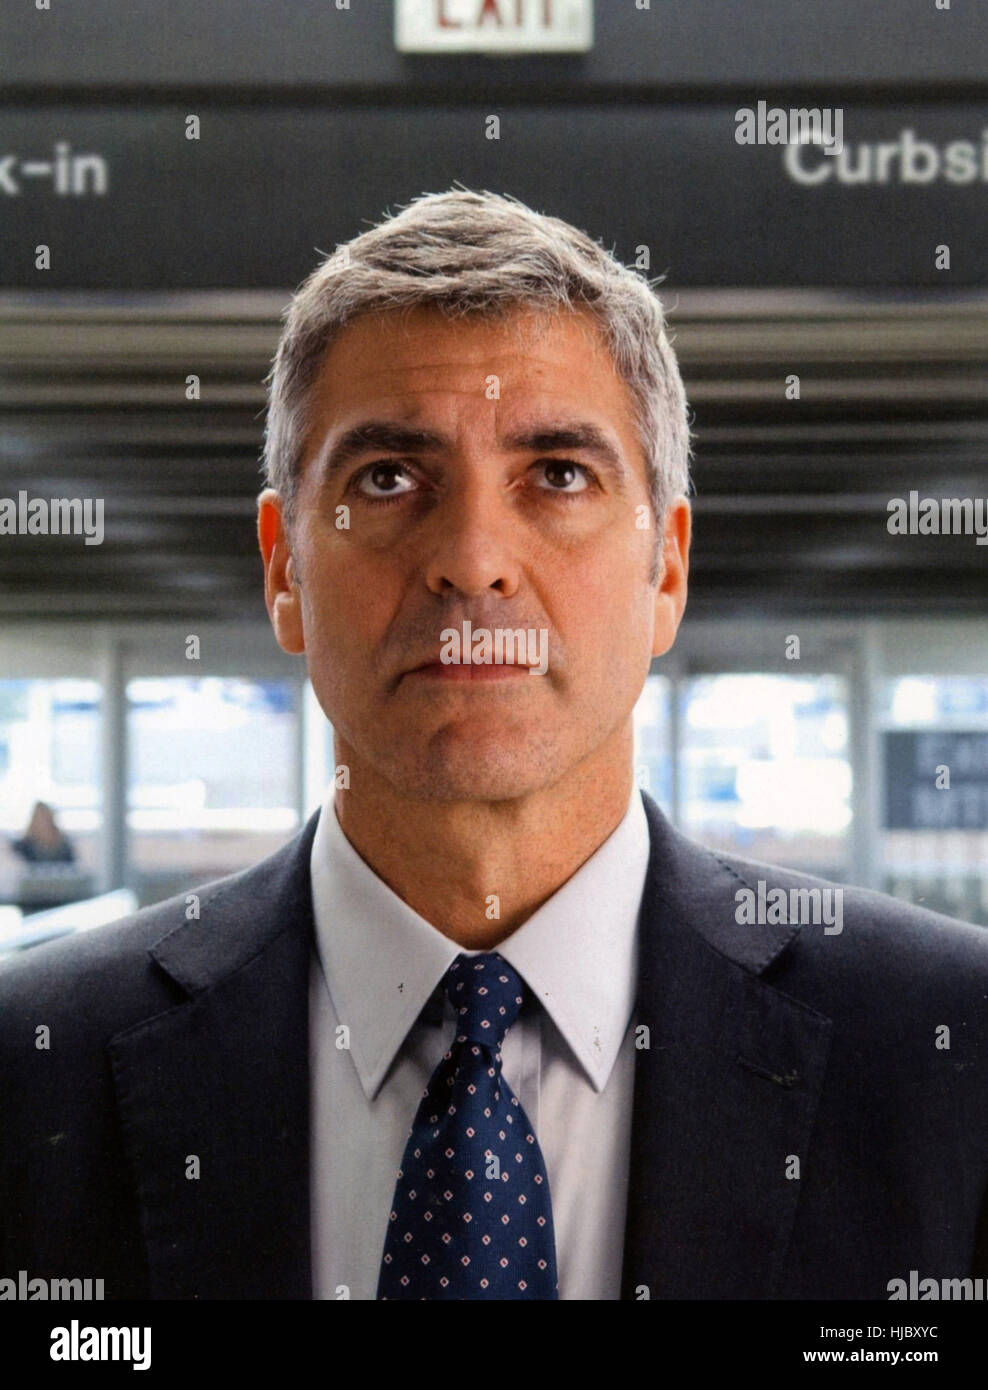 UP IN THE AIR 2009 Paramount Pictures Film mit George Clooney Stockfoto